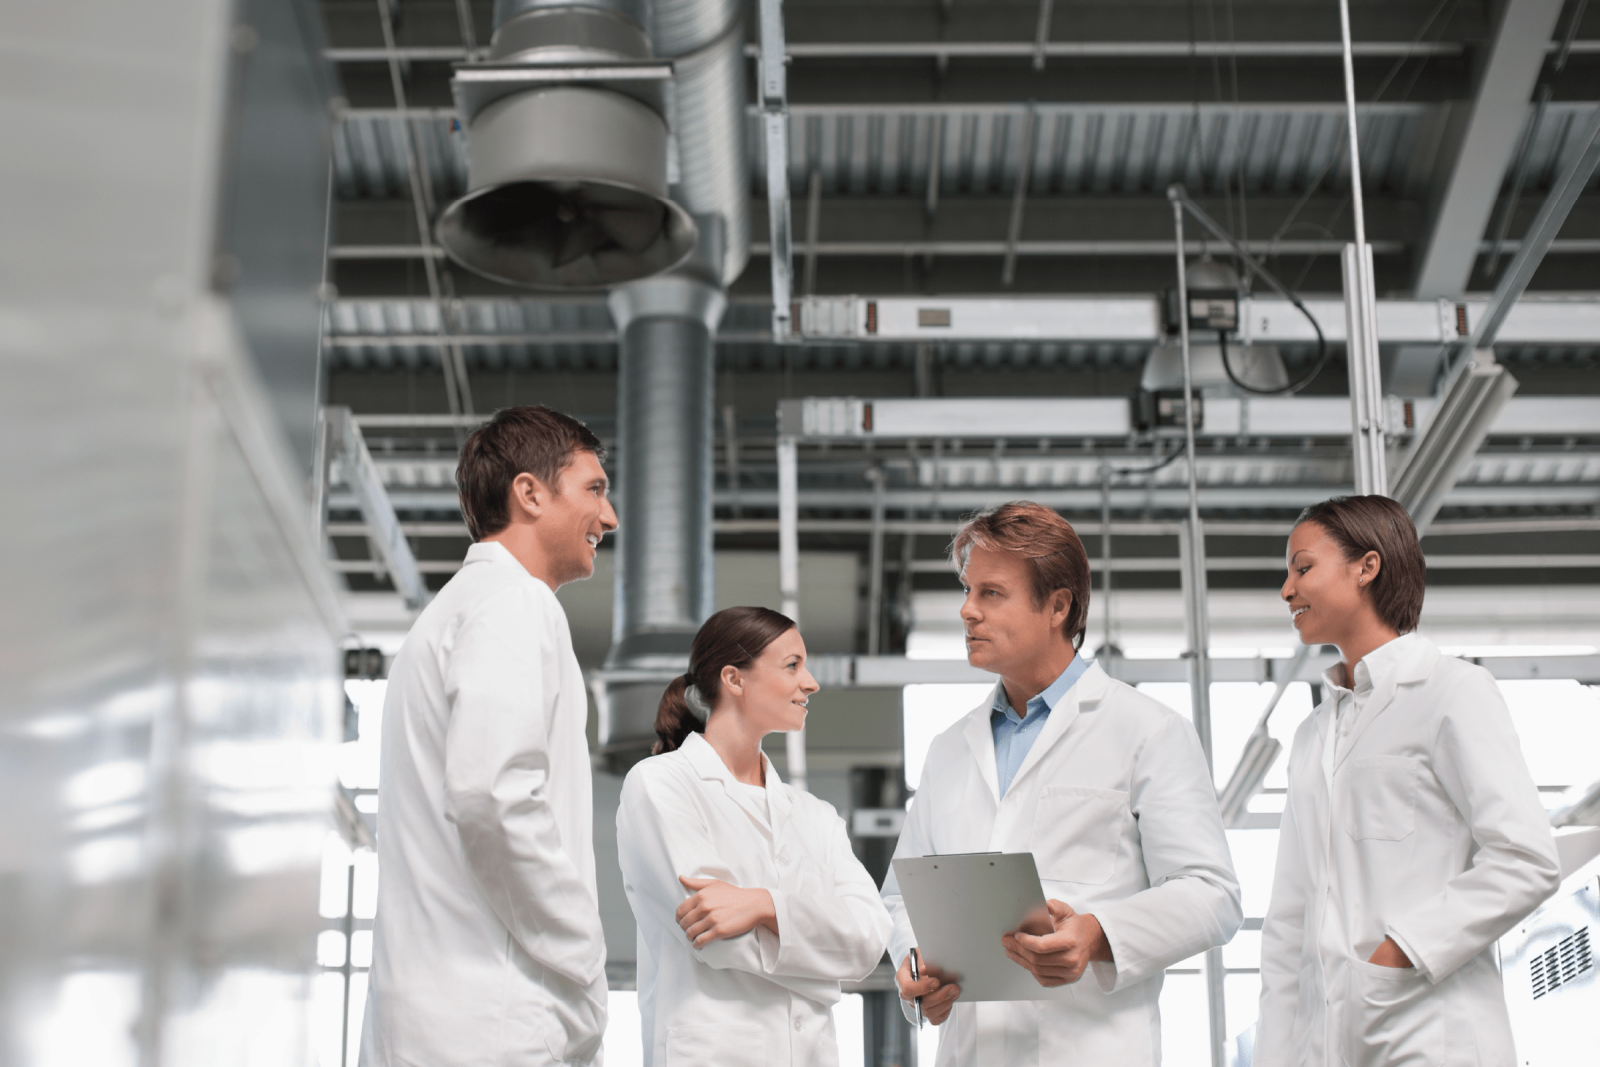 image of four workers in lab coats in conversation